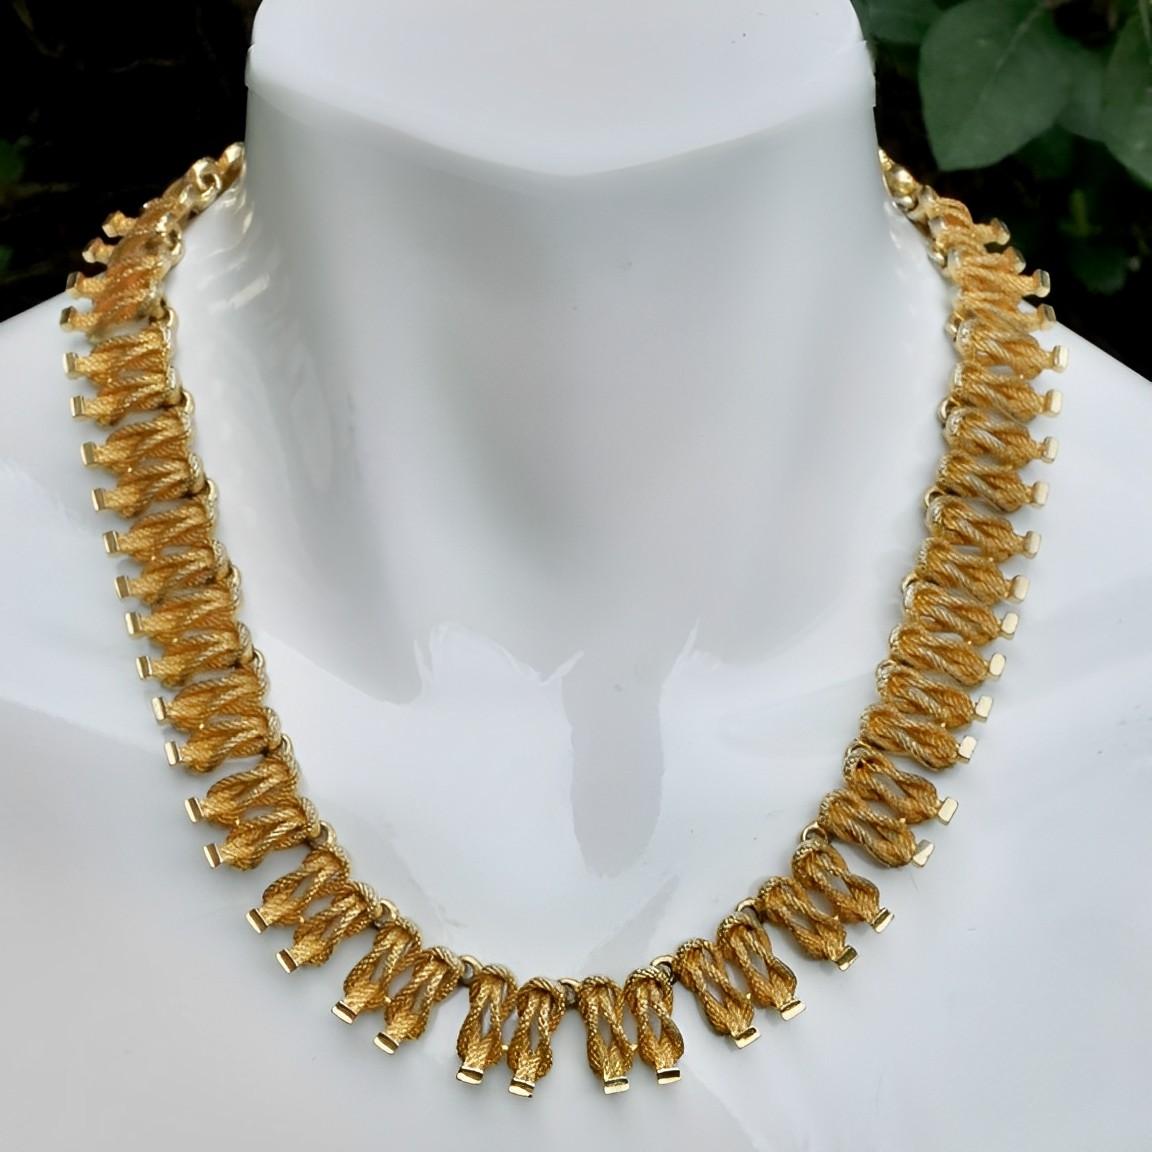 Wonderful gold plated necklace with pairs of textured knot design links. The links finish with a shiny rectangle. Measuring length 46.2 cm  / 18.1 inches by width 1.7 cm / .66 inch. There is wear to the gold plating.

This is a beautiful and stylish